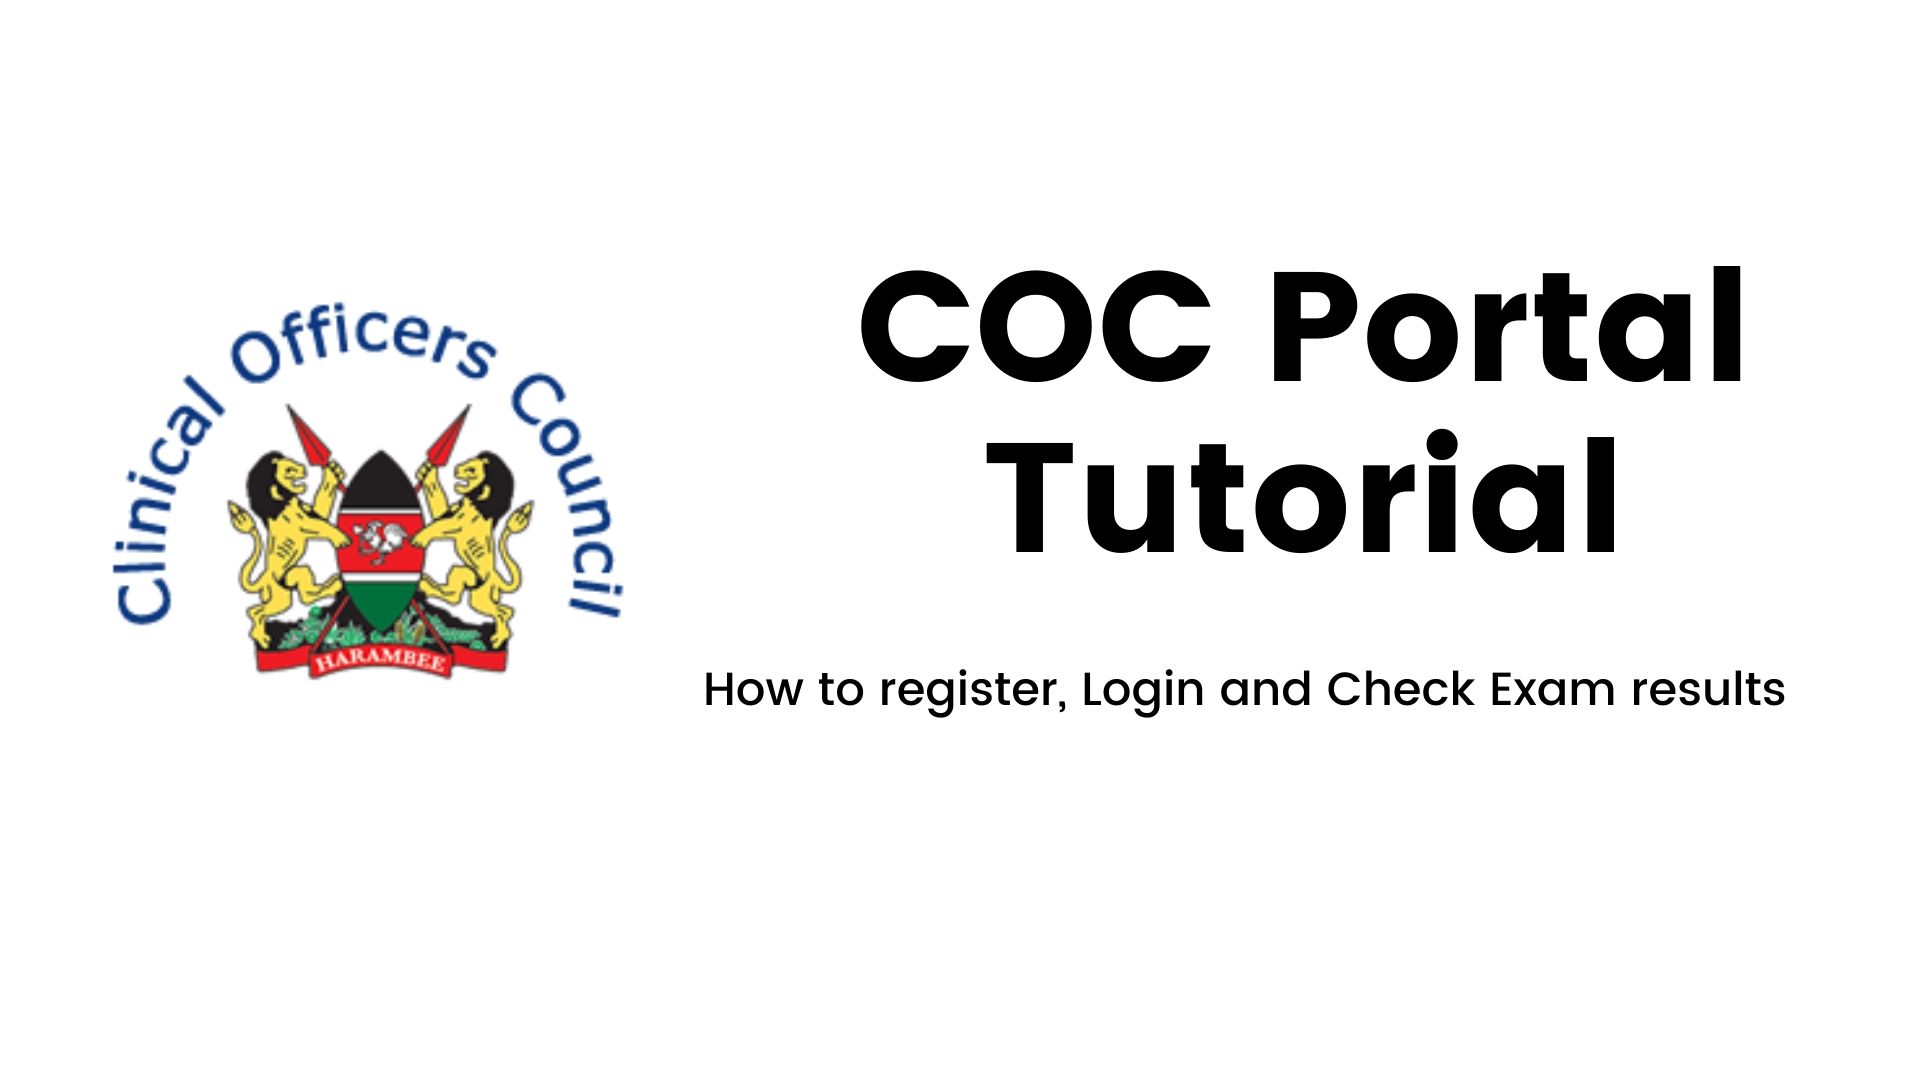 COC Portal website: Registration and Exam Results checking